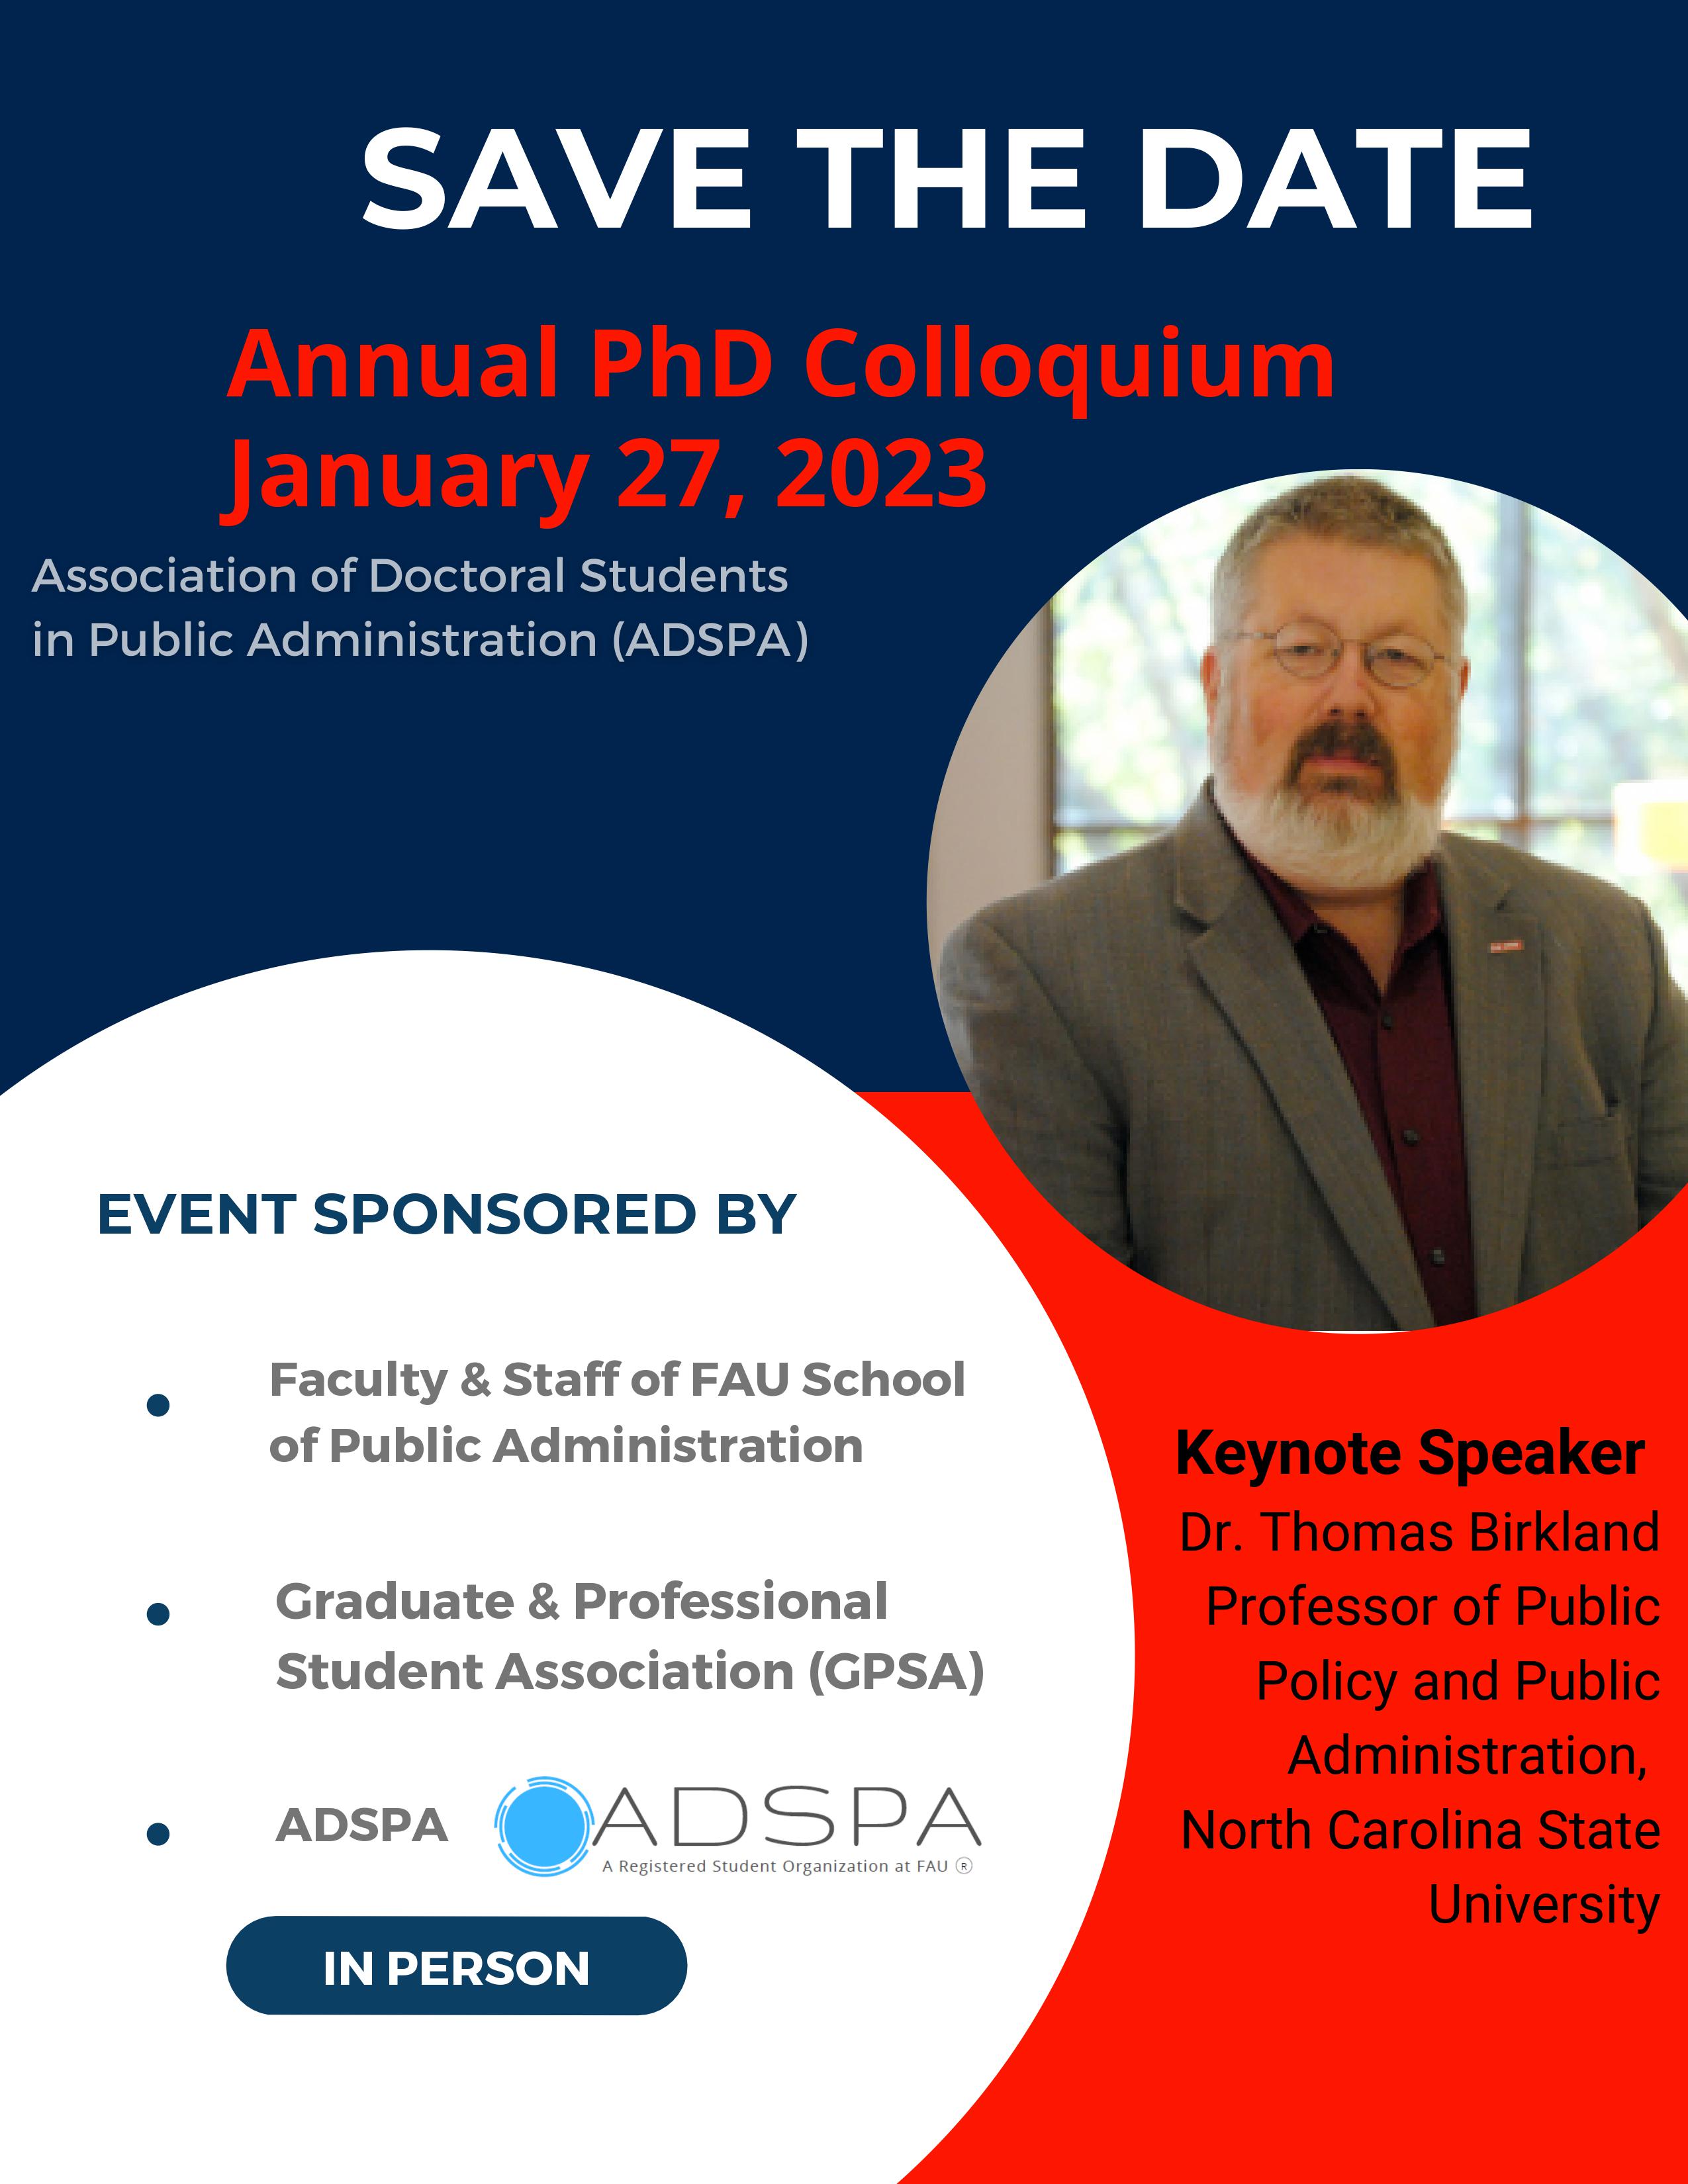 Save the Date: Annual PhD Colloquium - January 27, 2023. Association of Doctoral Students in Public Administration (ADSPA). Event Sponsored by Facutly and Staff of FAU School of Public Administration, Graduate and Professional Student Association (GPSA), ADSPA. In person event. Keynote Speaker: Dr. Thomas Birkland, Professor of Public Policy and Public Administration, North Carolina State University